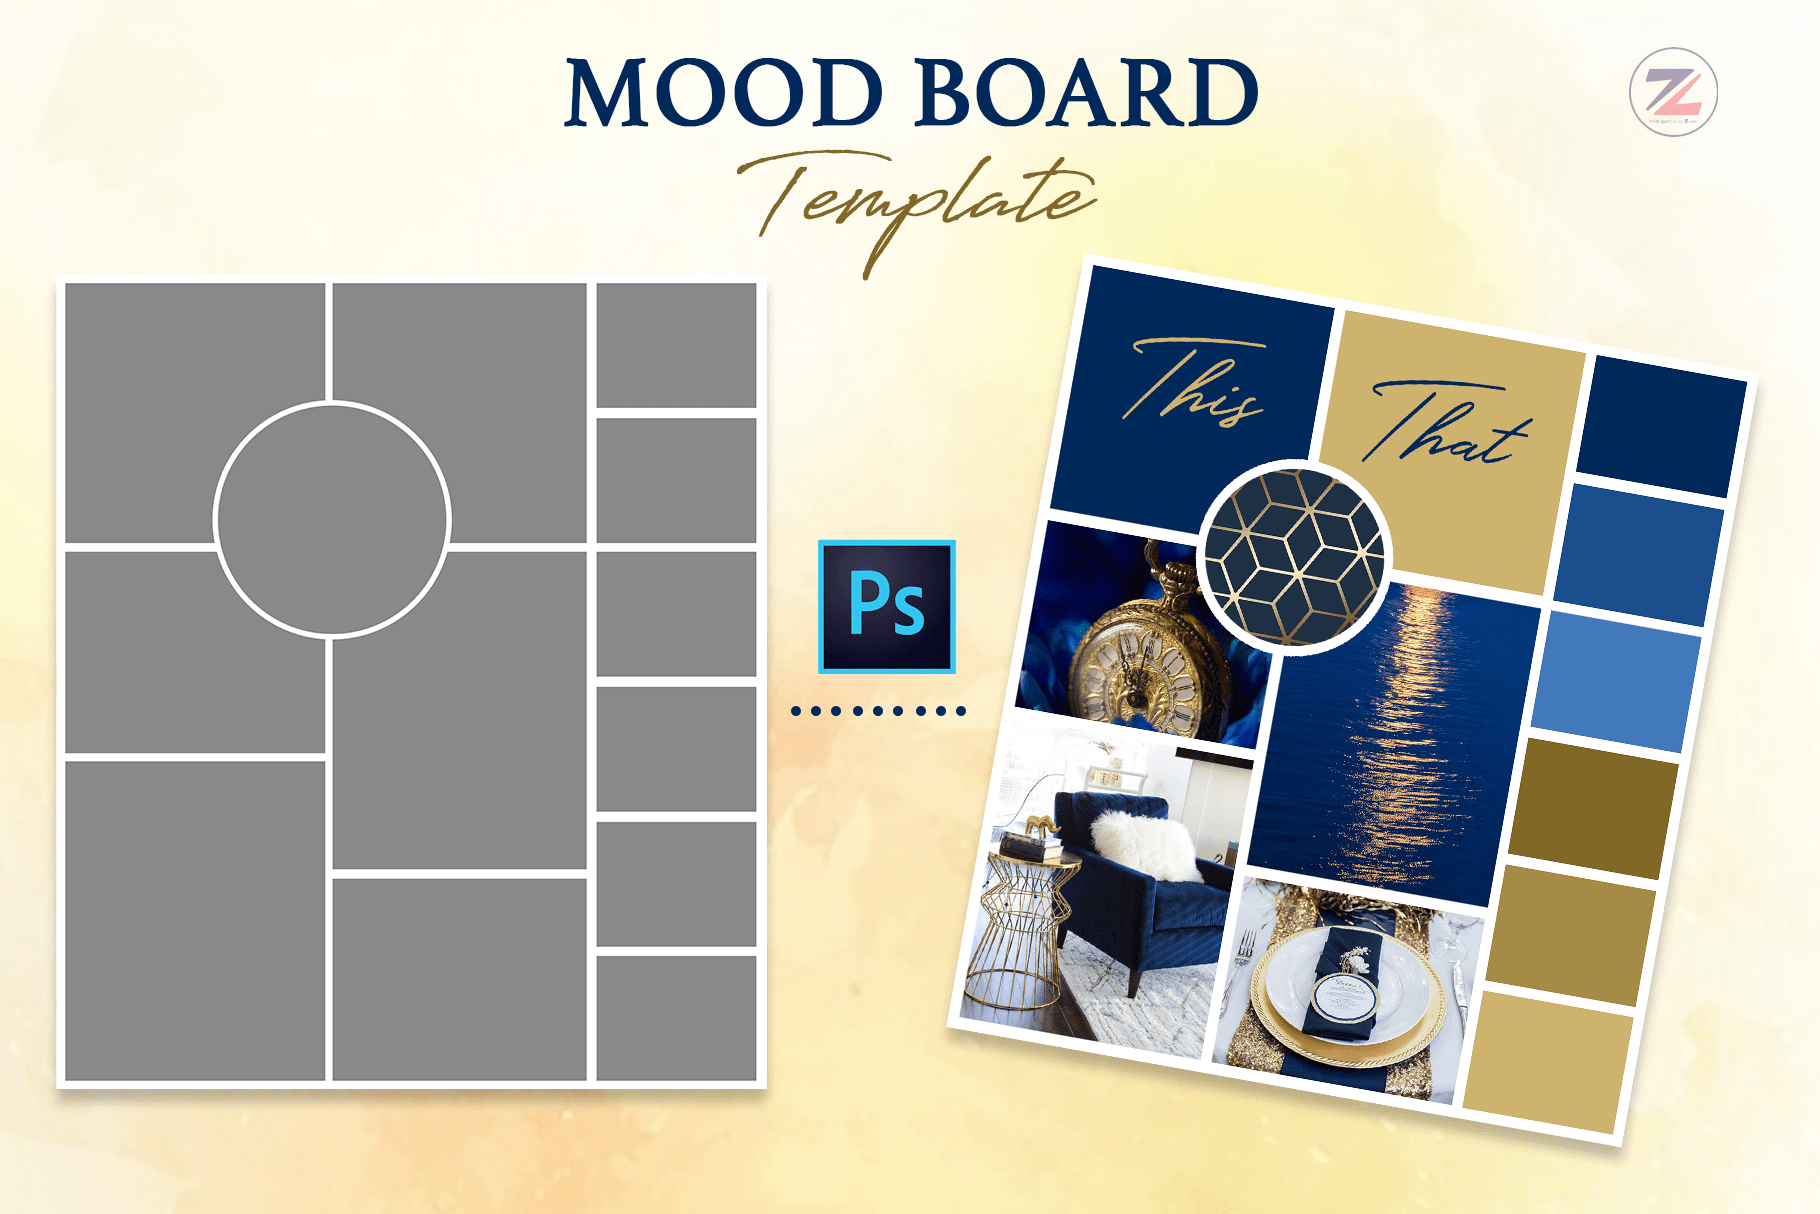 moodboard template photoshop free download